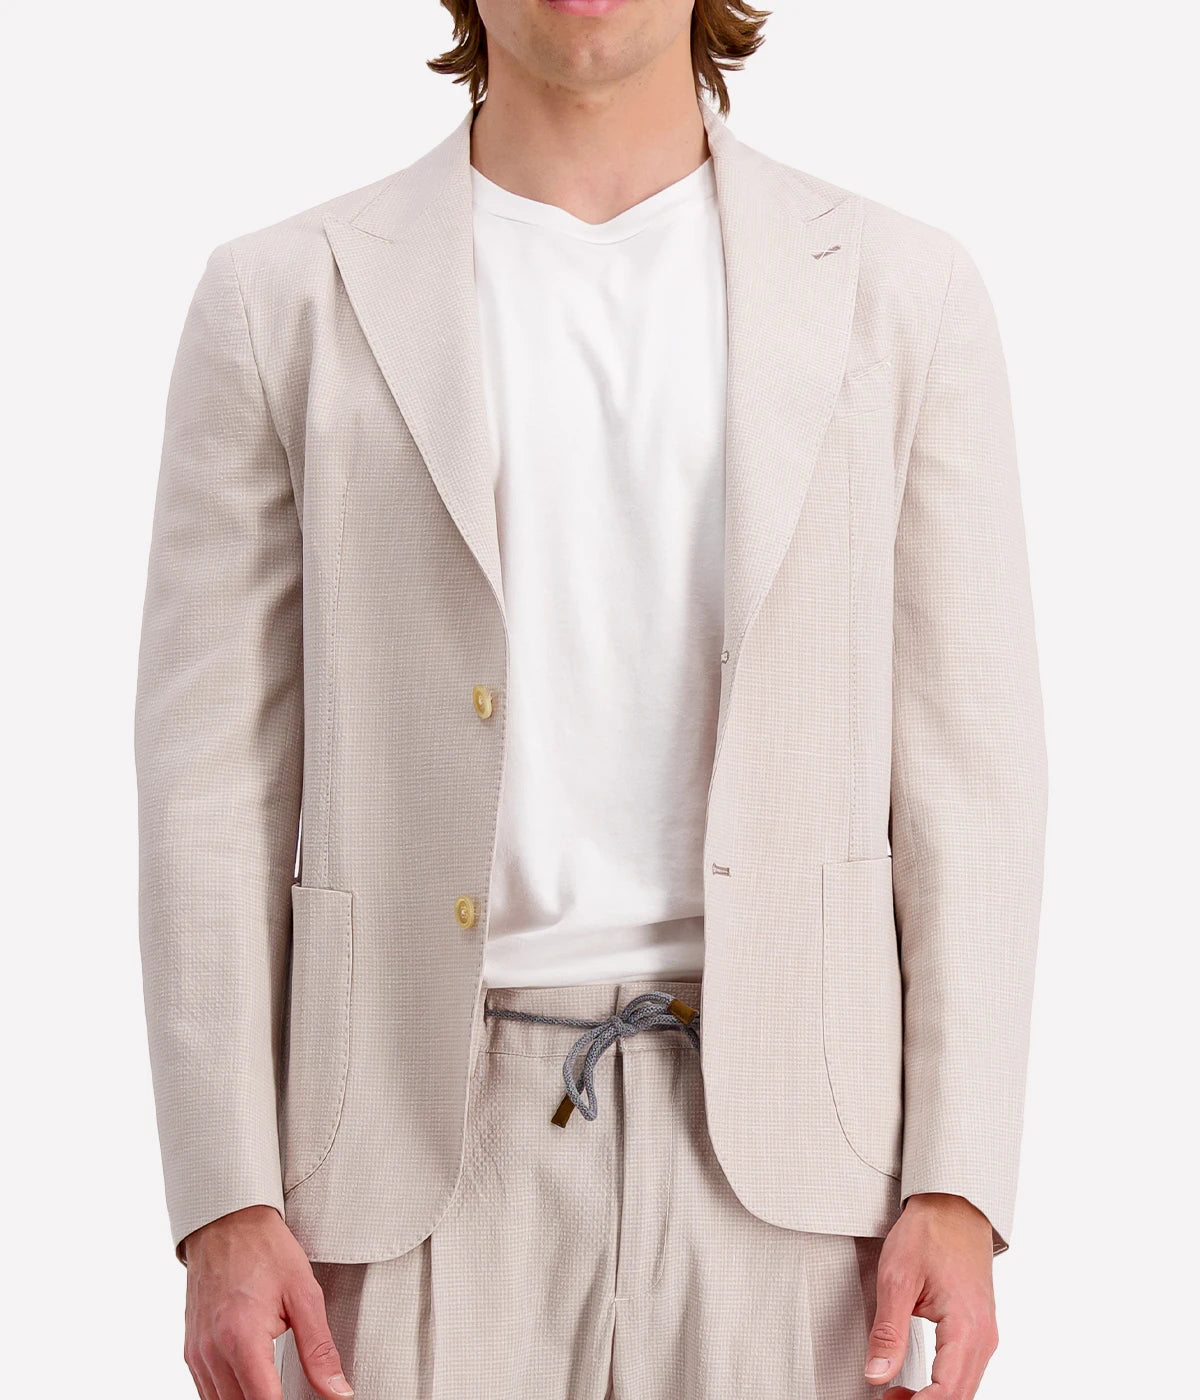 Single Breasted Deconstructed Soft Jacket in Sand